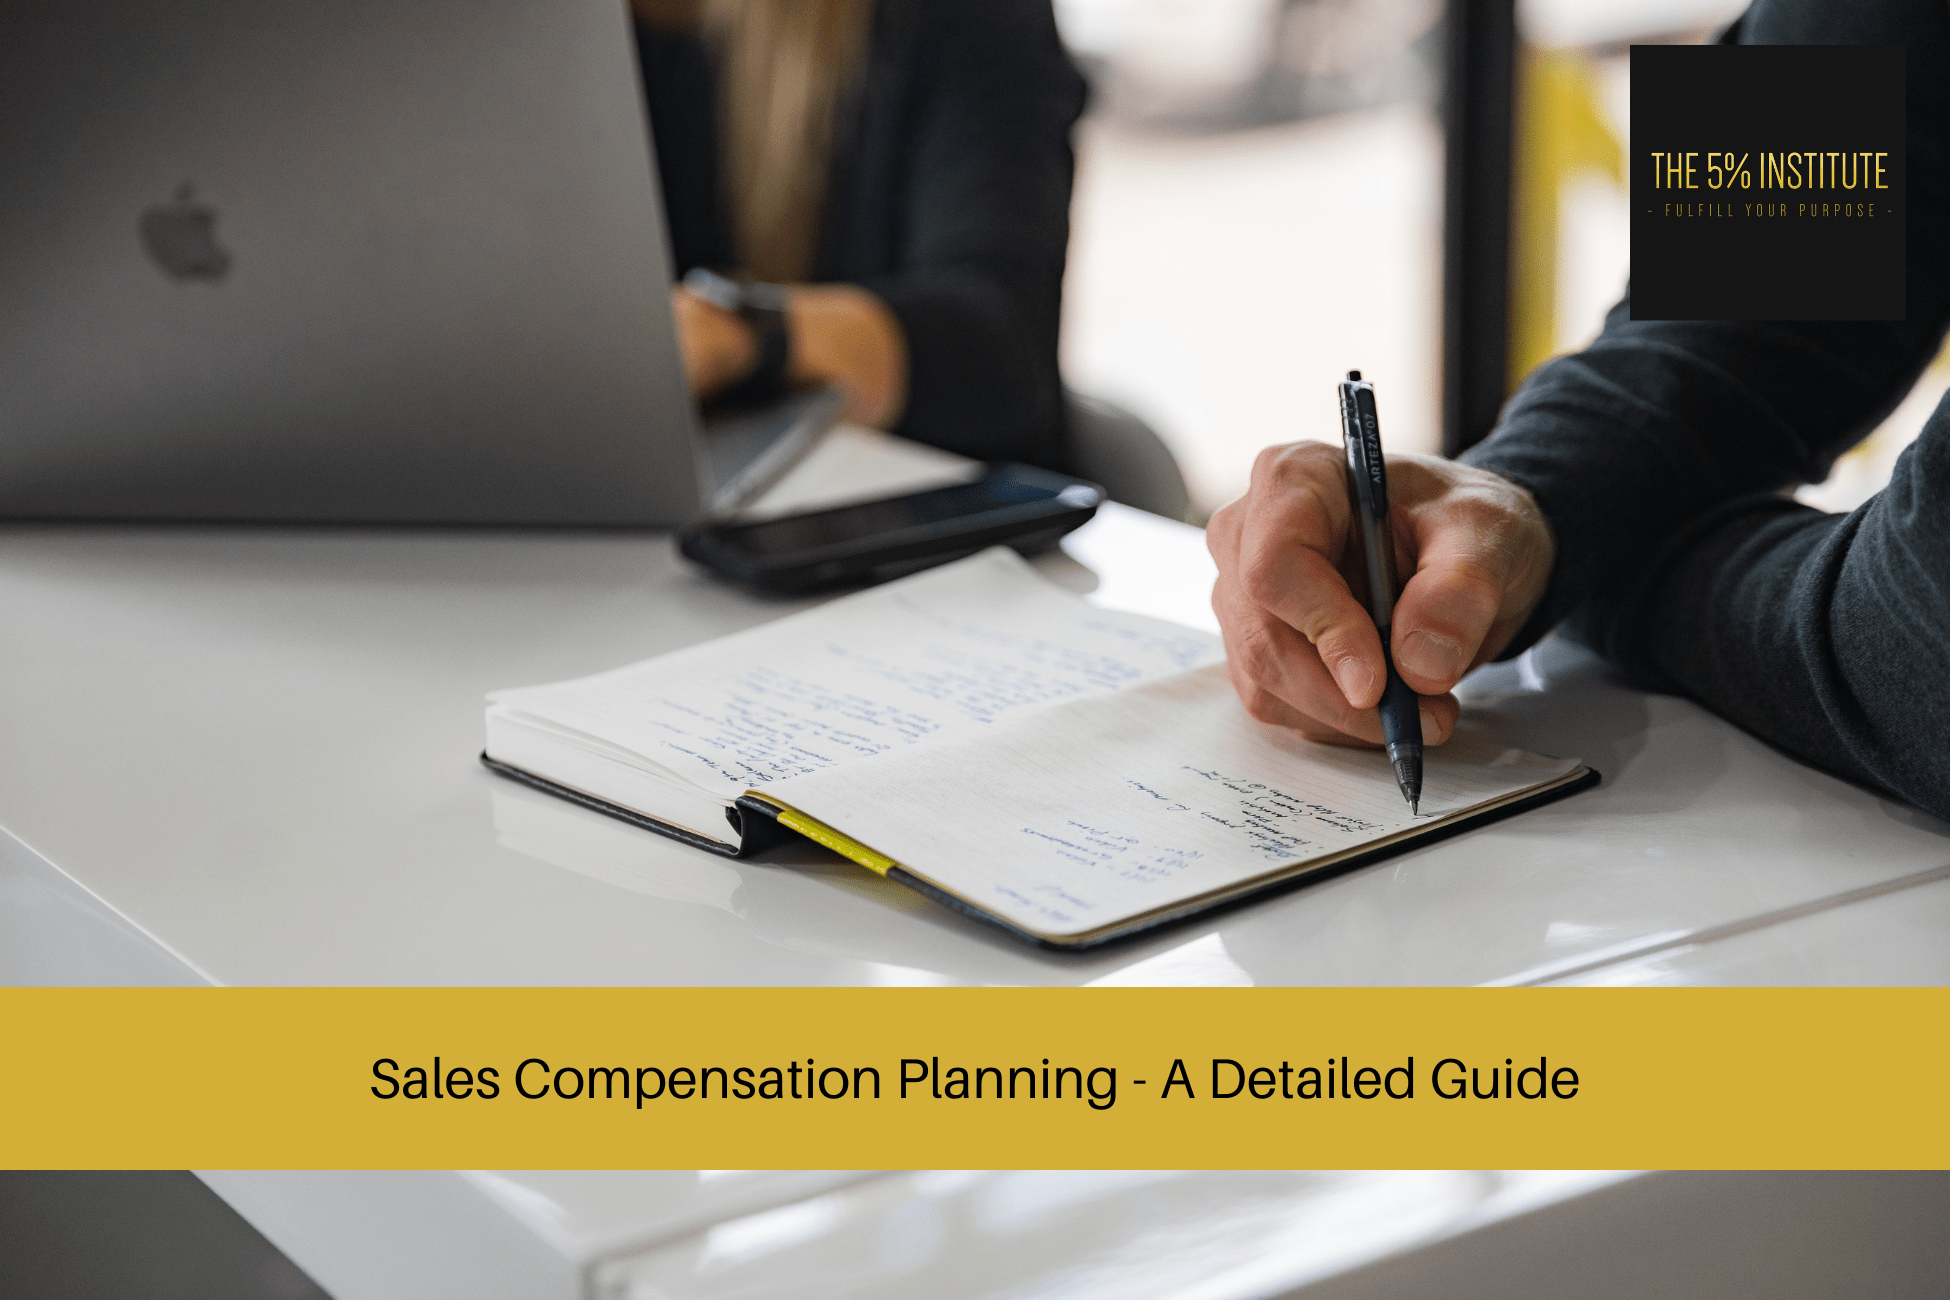 Sales Compensation Planning - A Detailed Guide